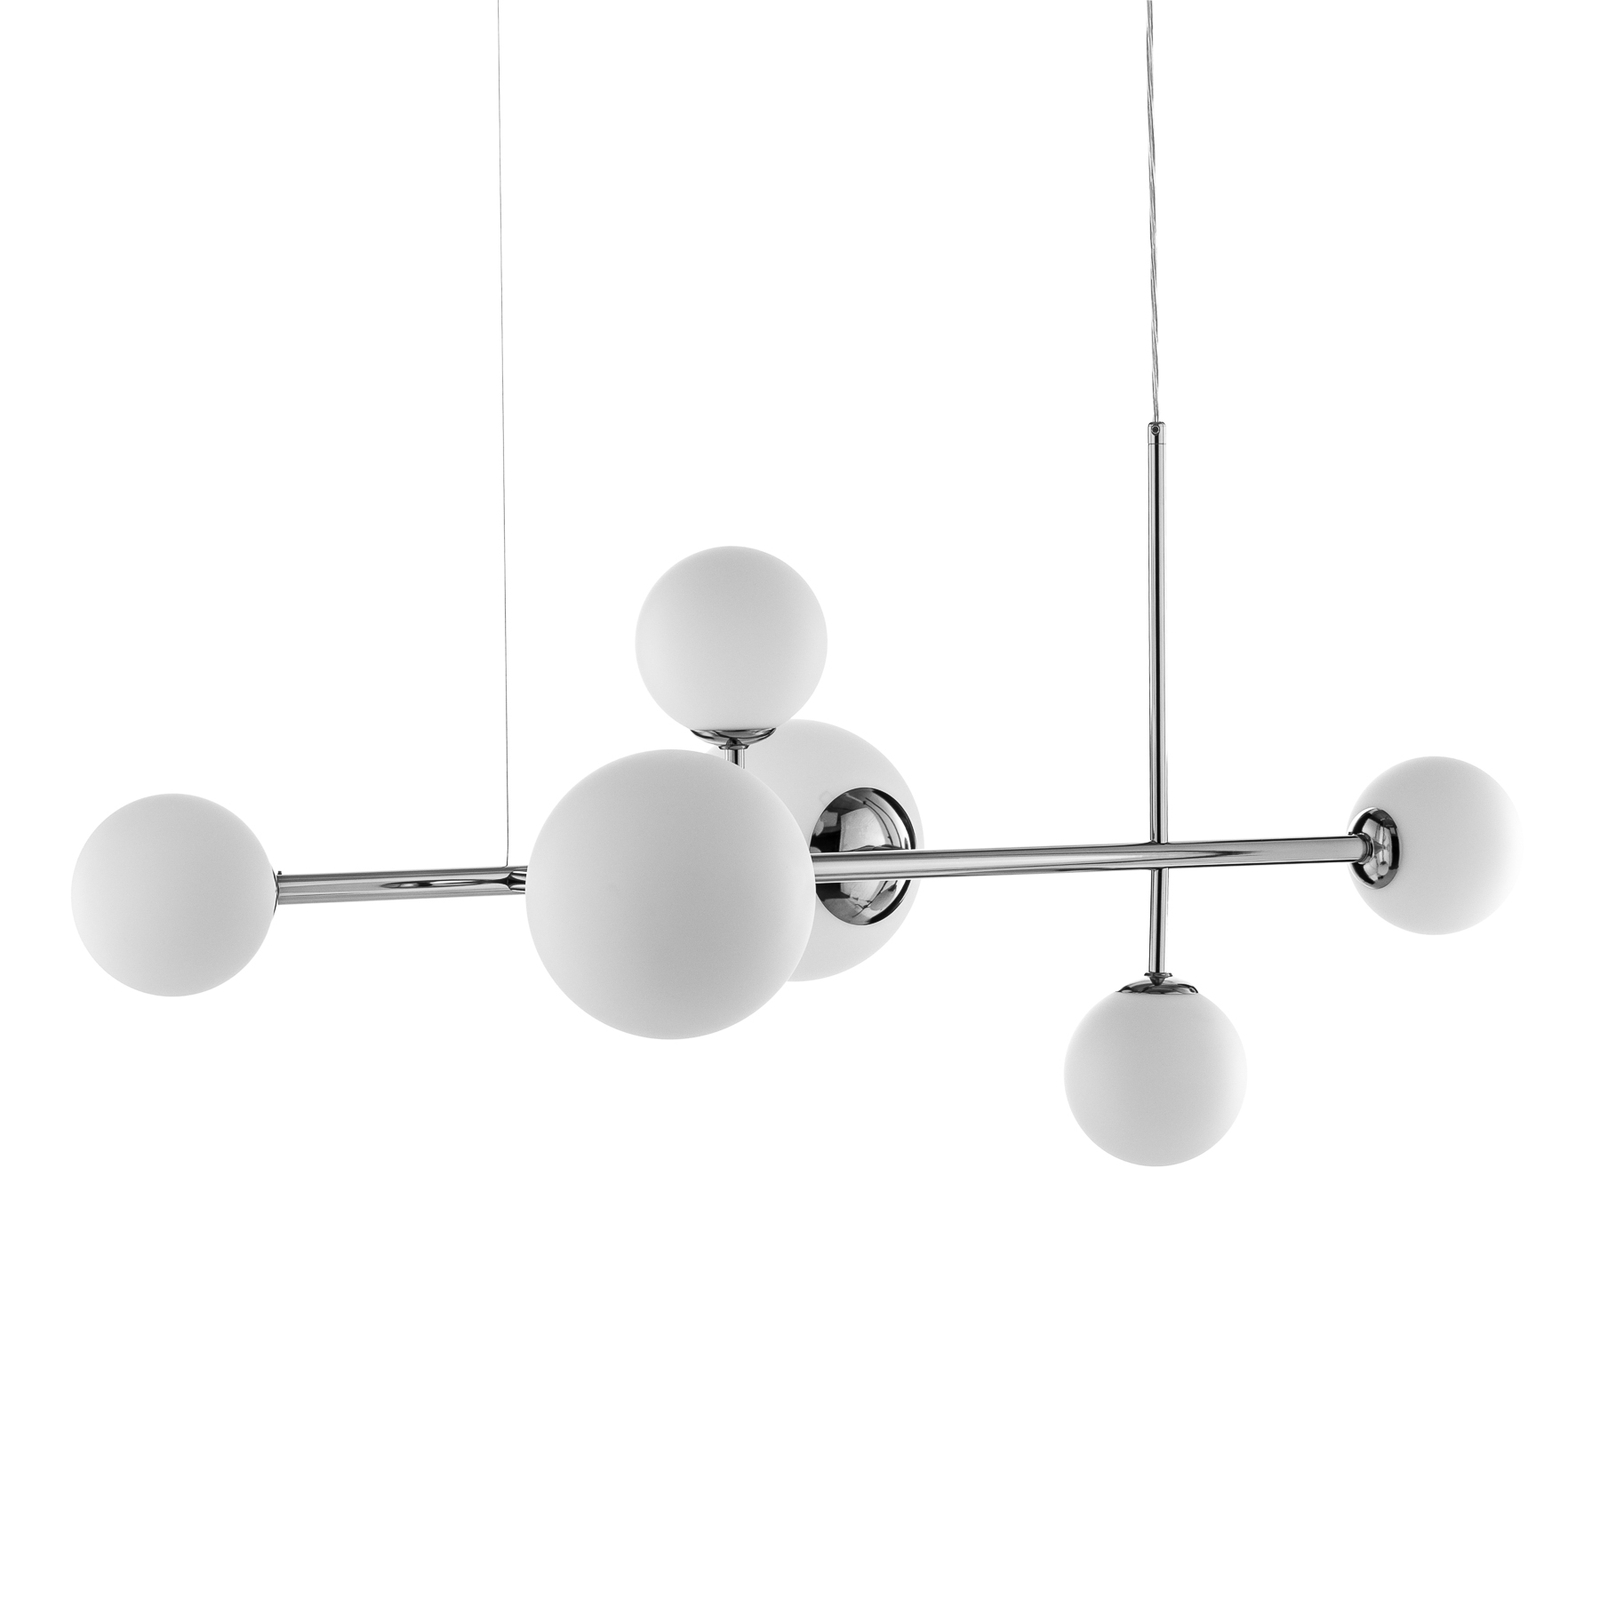 Hanglamp Dione, 6-lamps, chroom